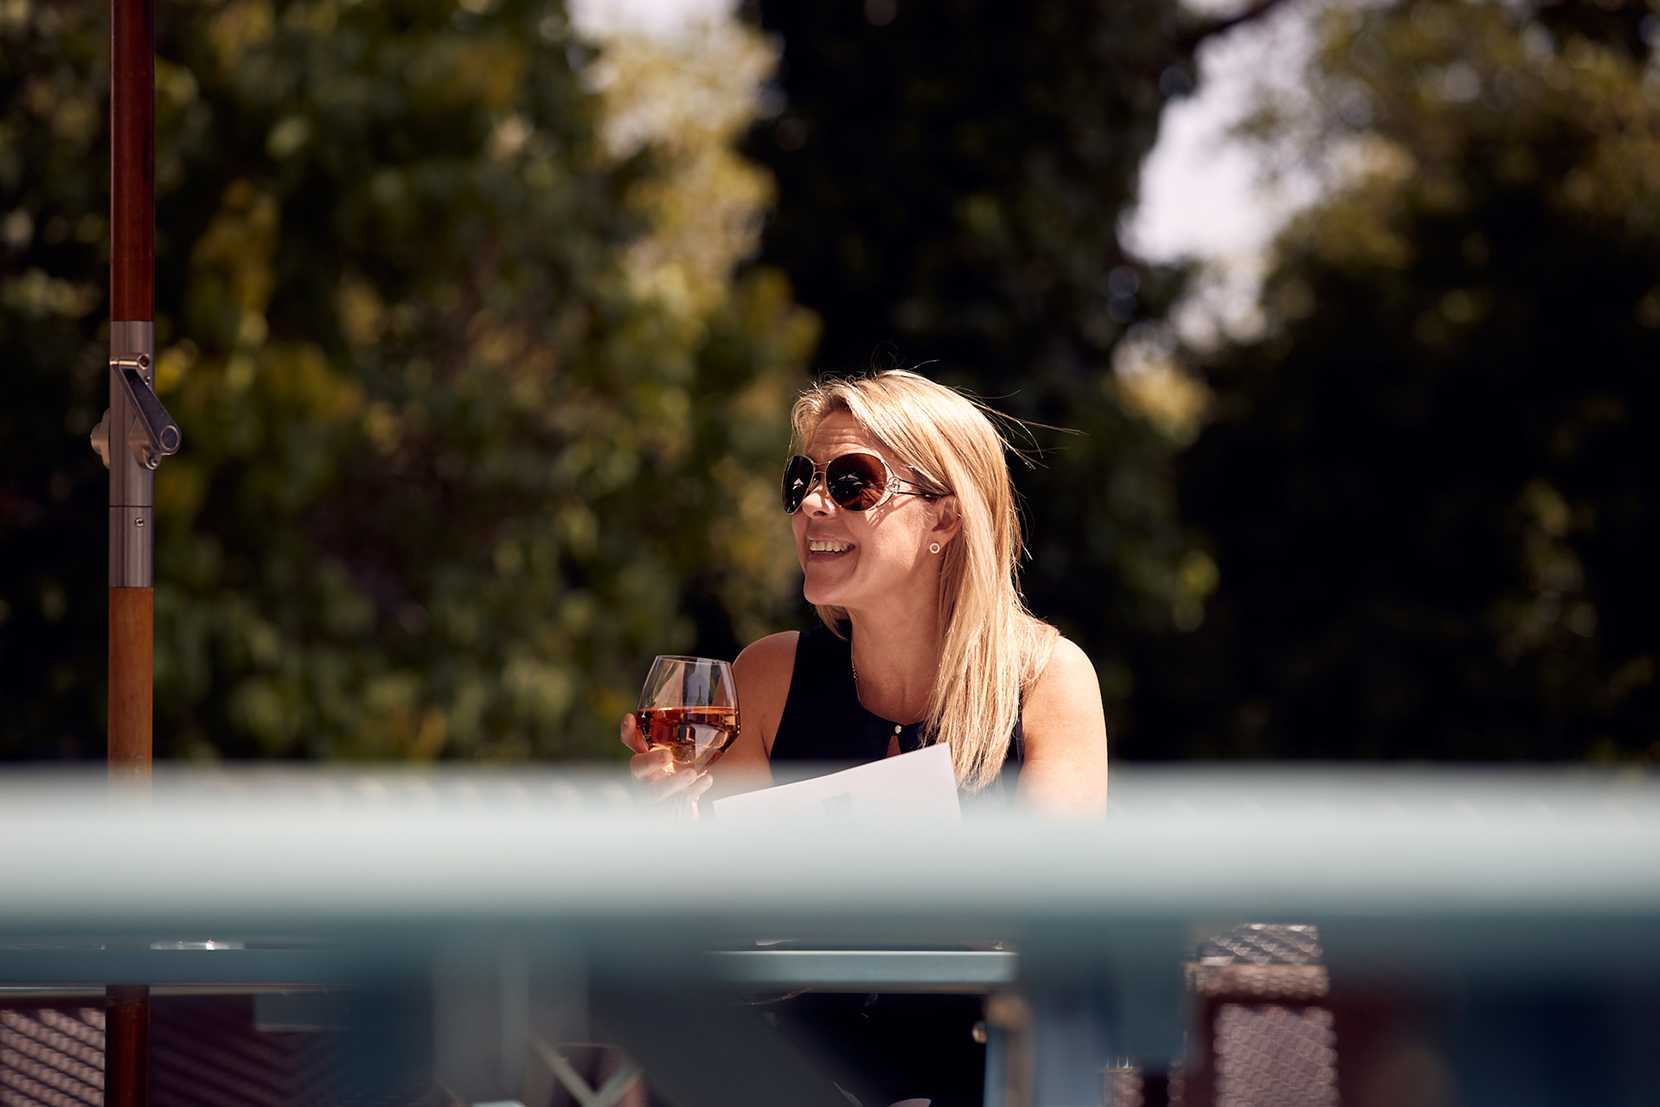 A woman wearing sunglasses is smiling at something off-camera, glass of wine in hand.